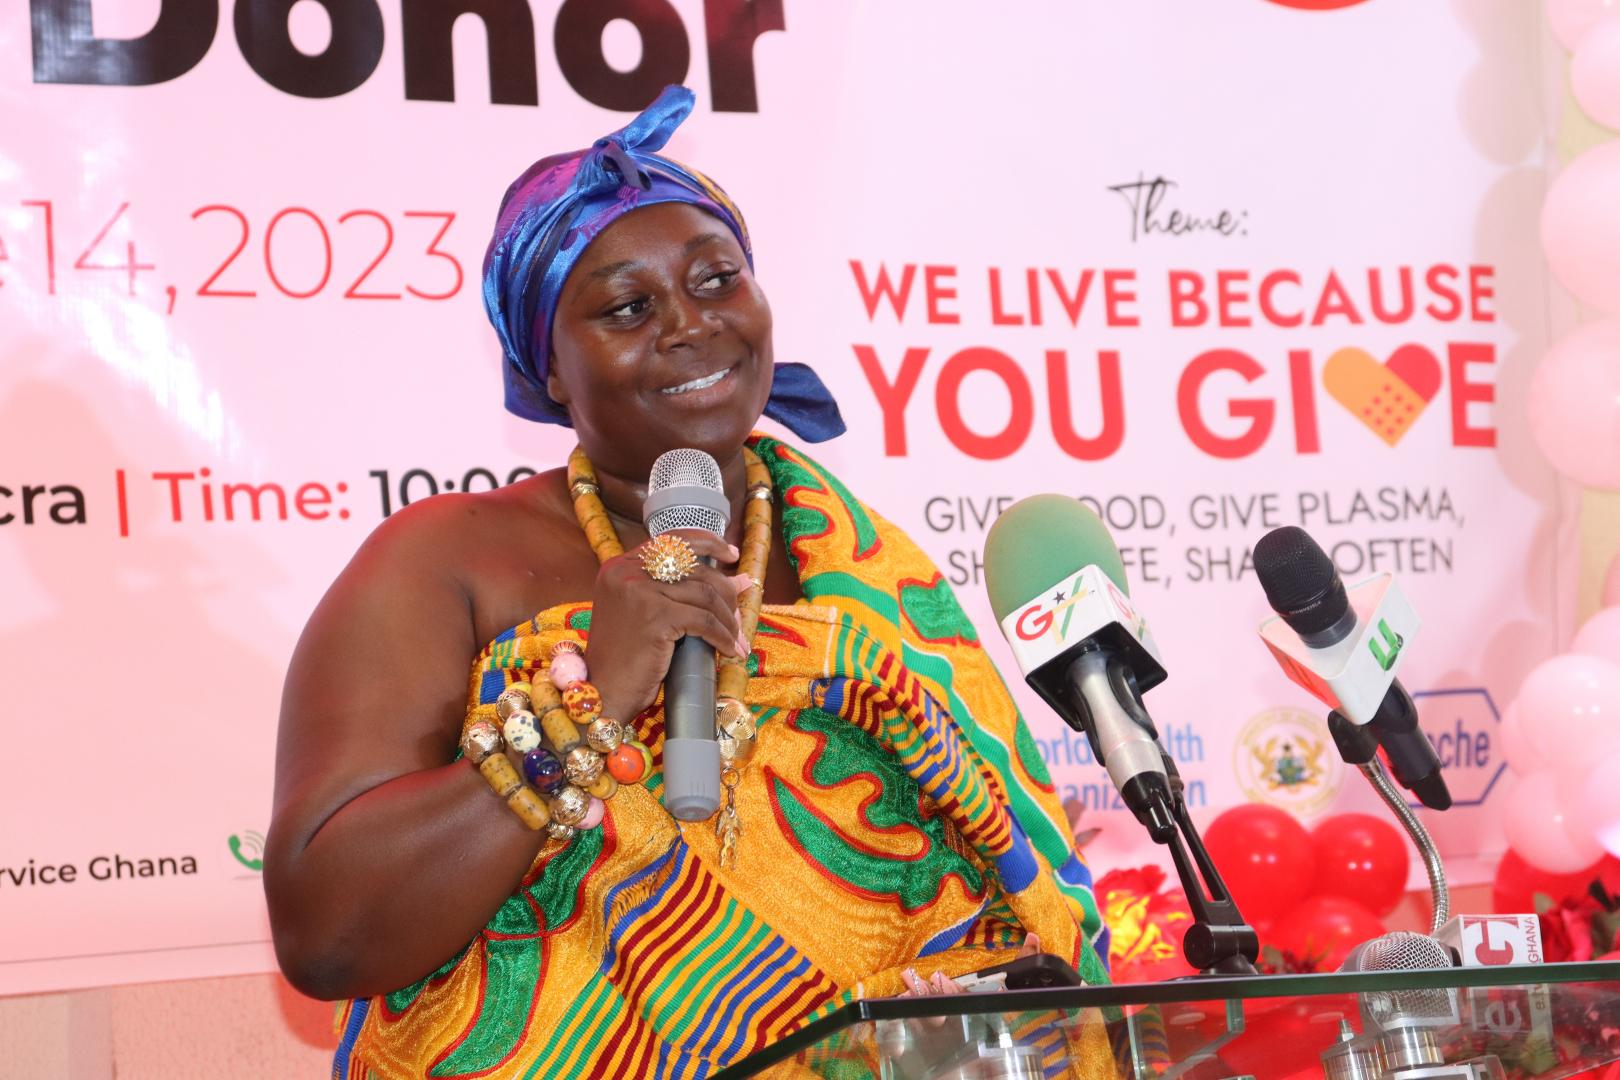  Nana Serwaa Brakatuo speaking at a blood donor recognition event